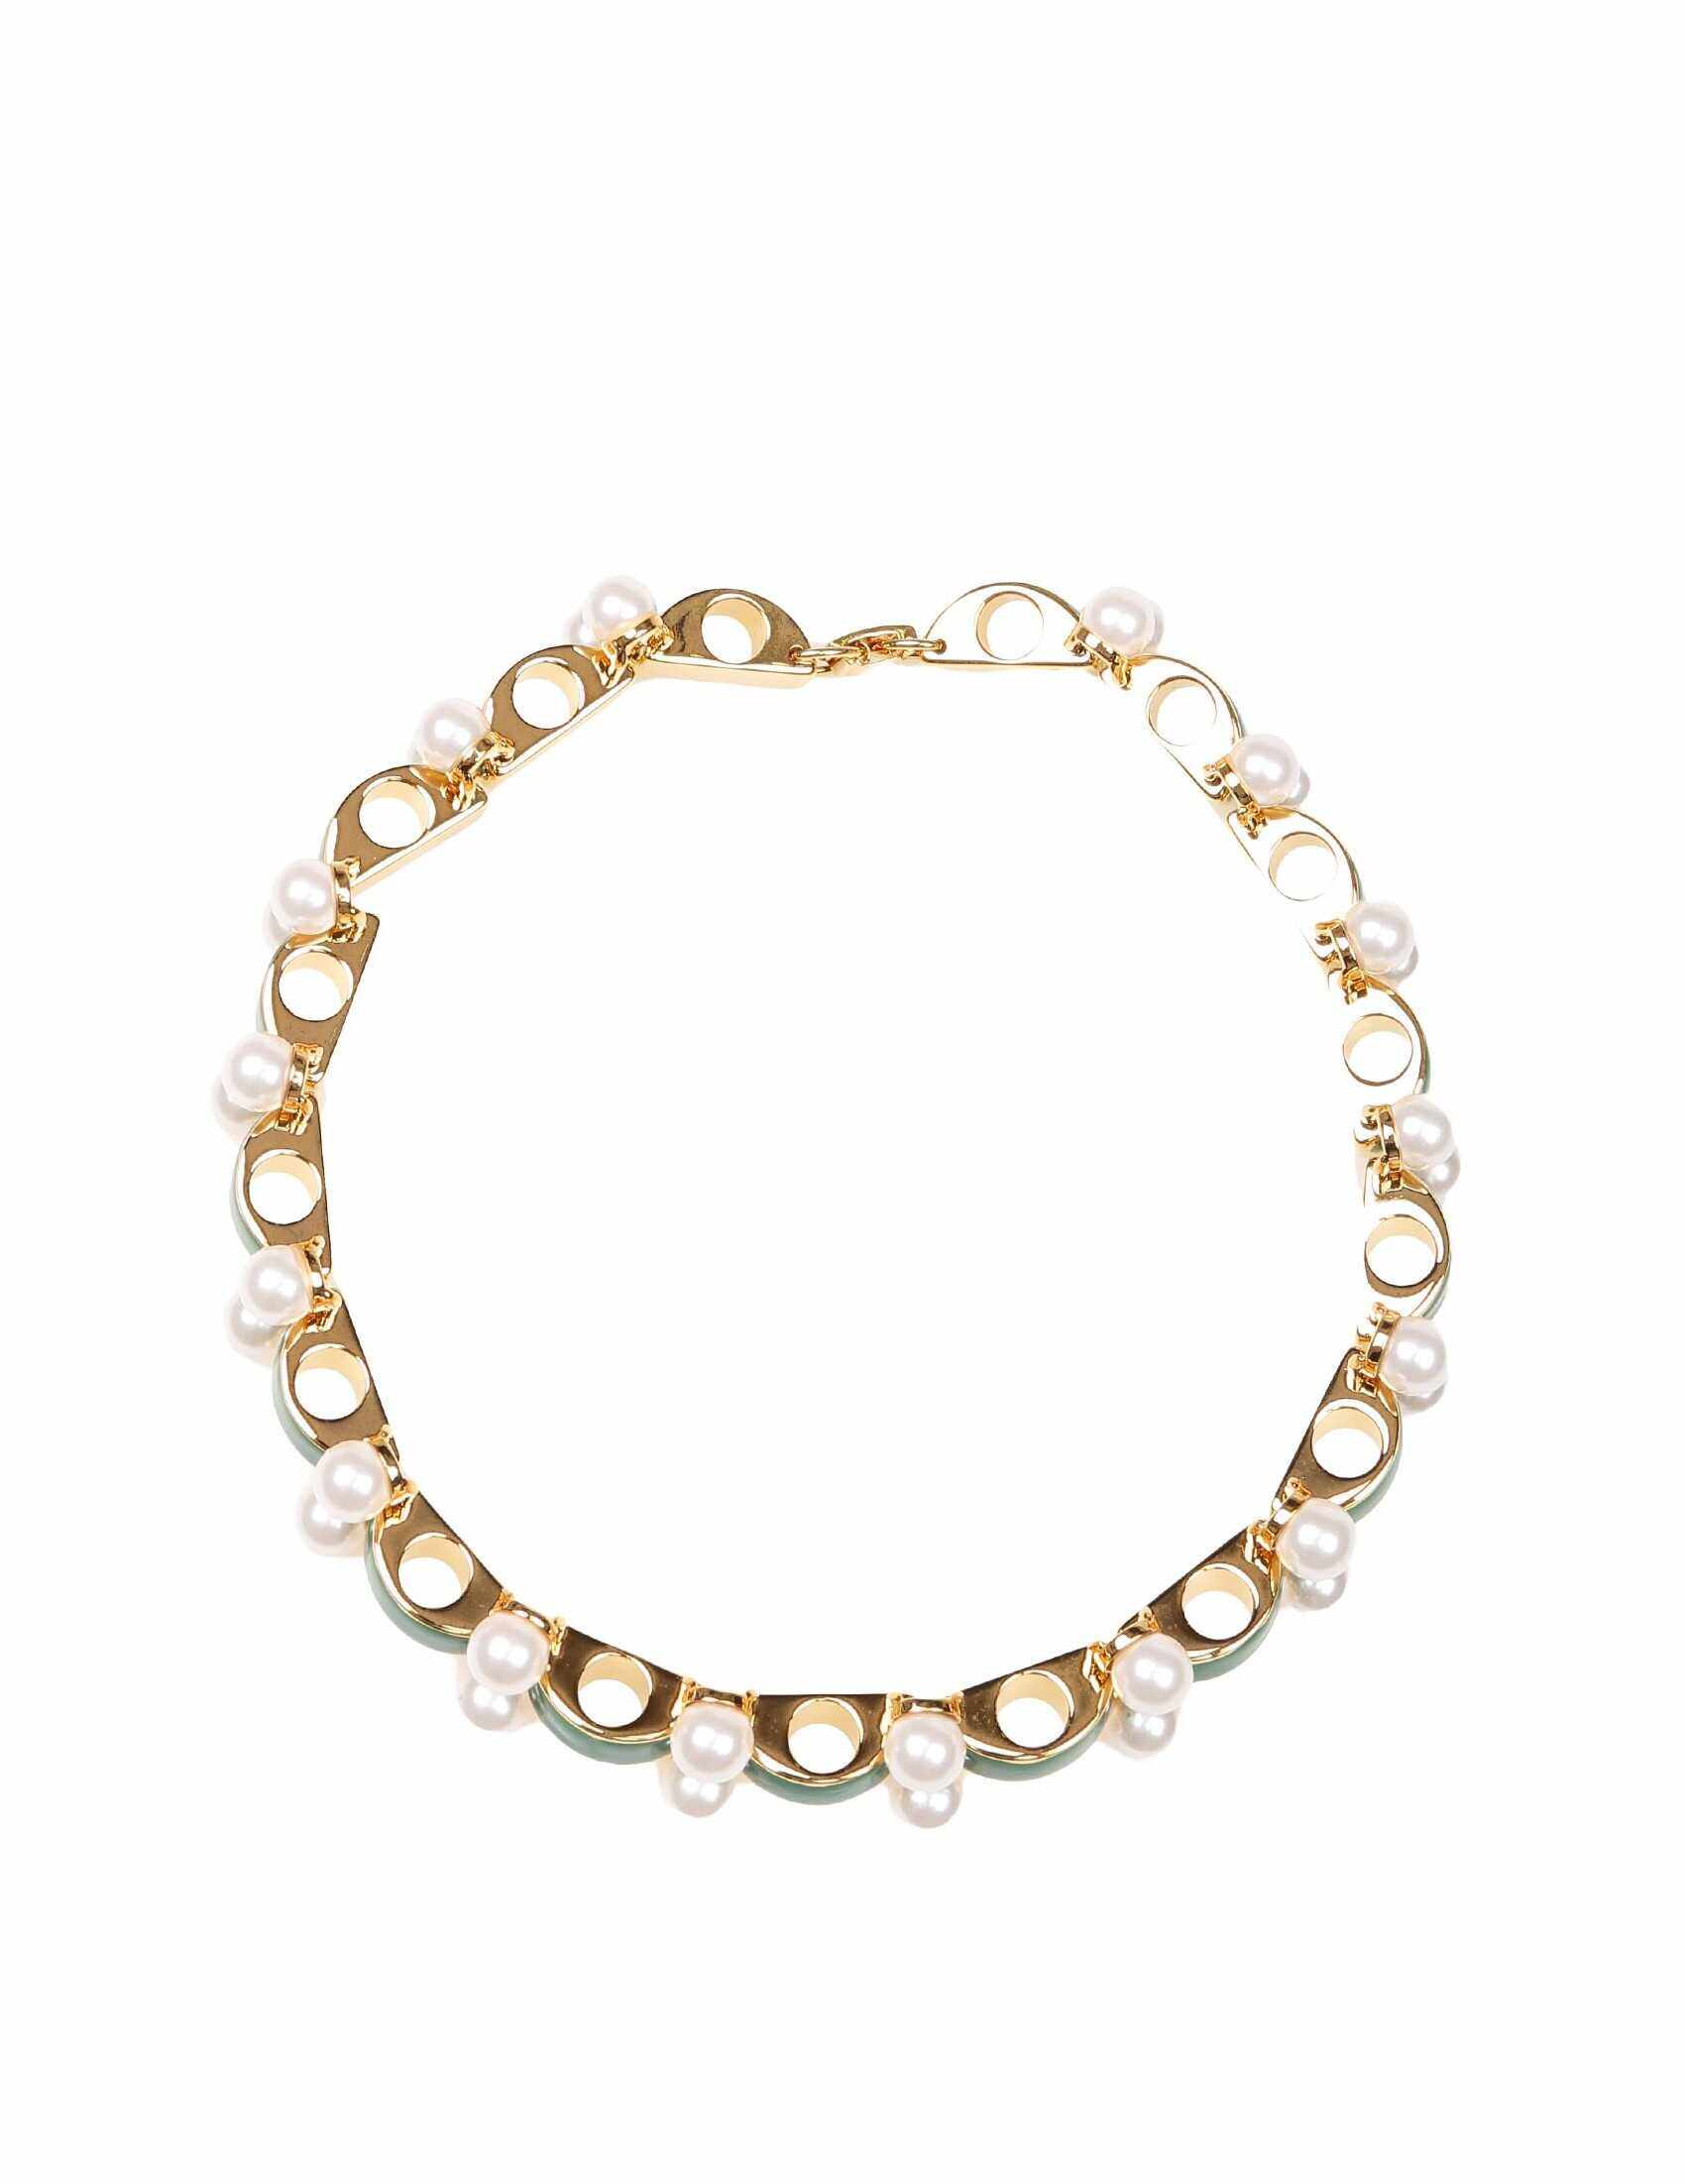 Marni necklace in enameled metal with applied pearls Gold